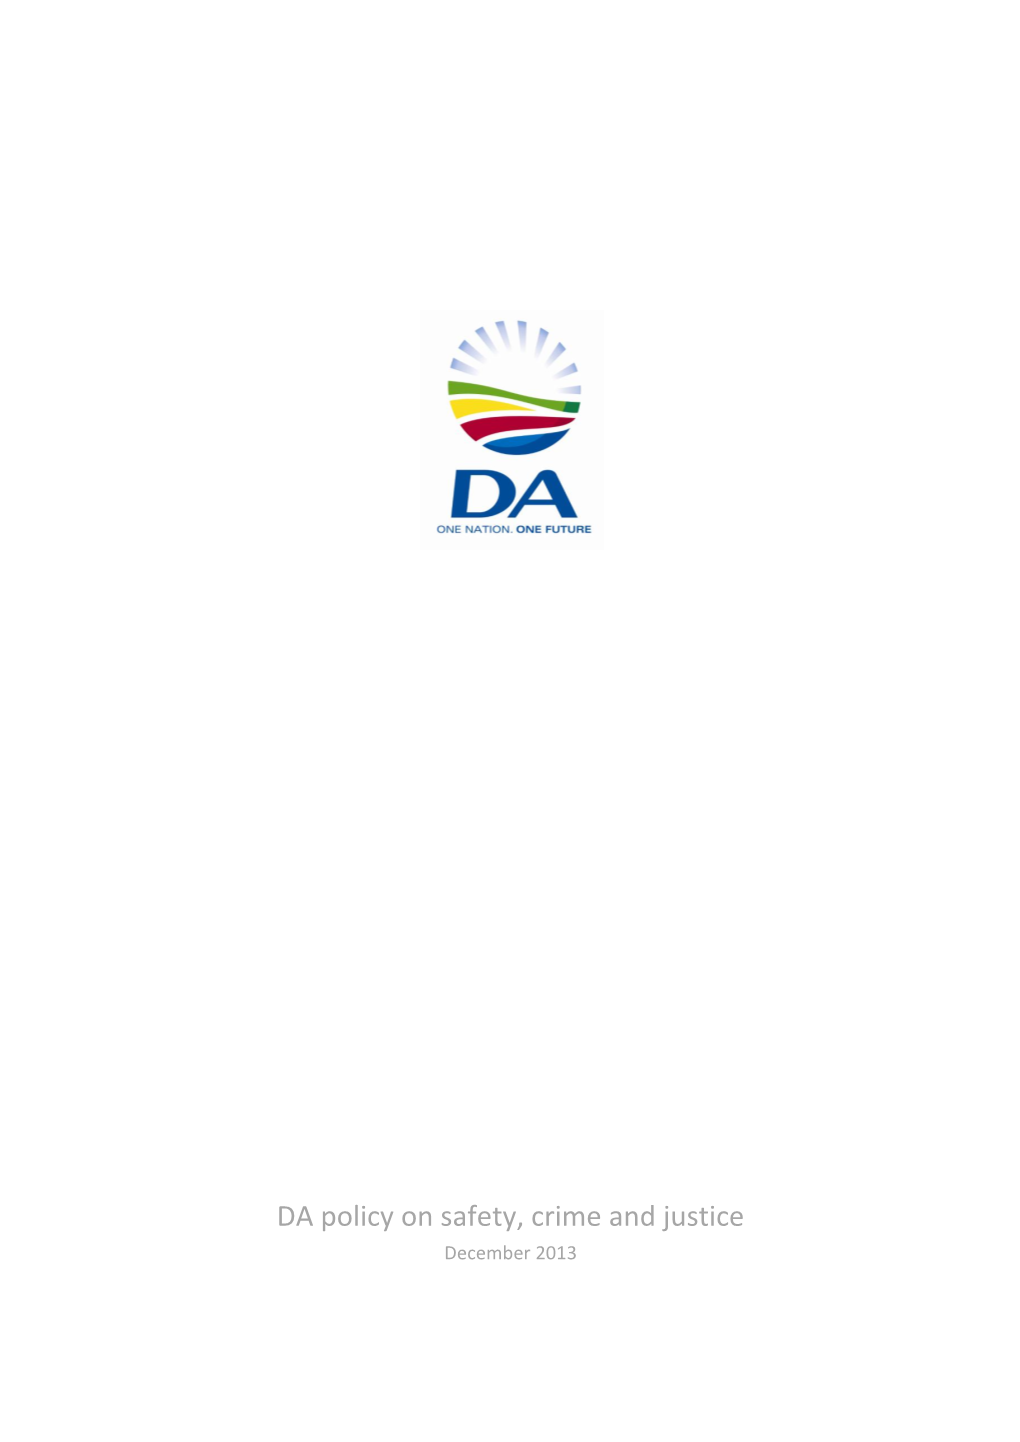 DA Policy on Safety, Crime and Justice December 2013